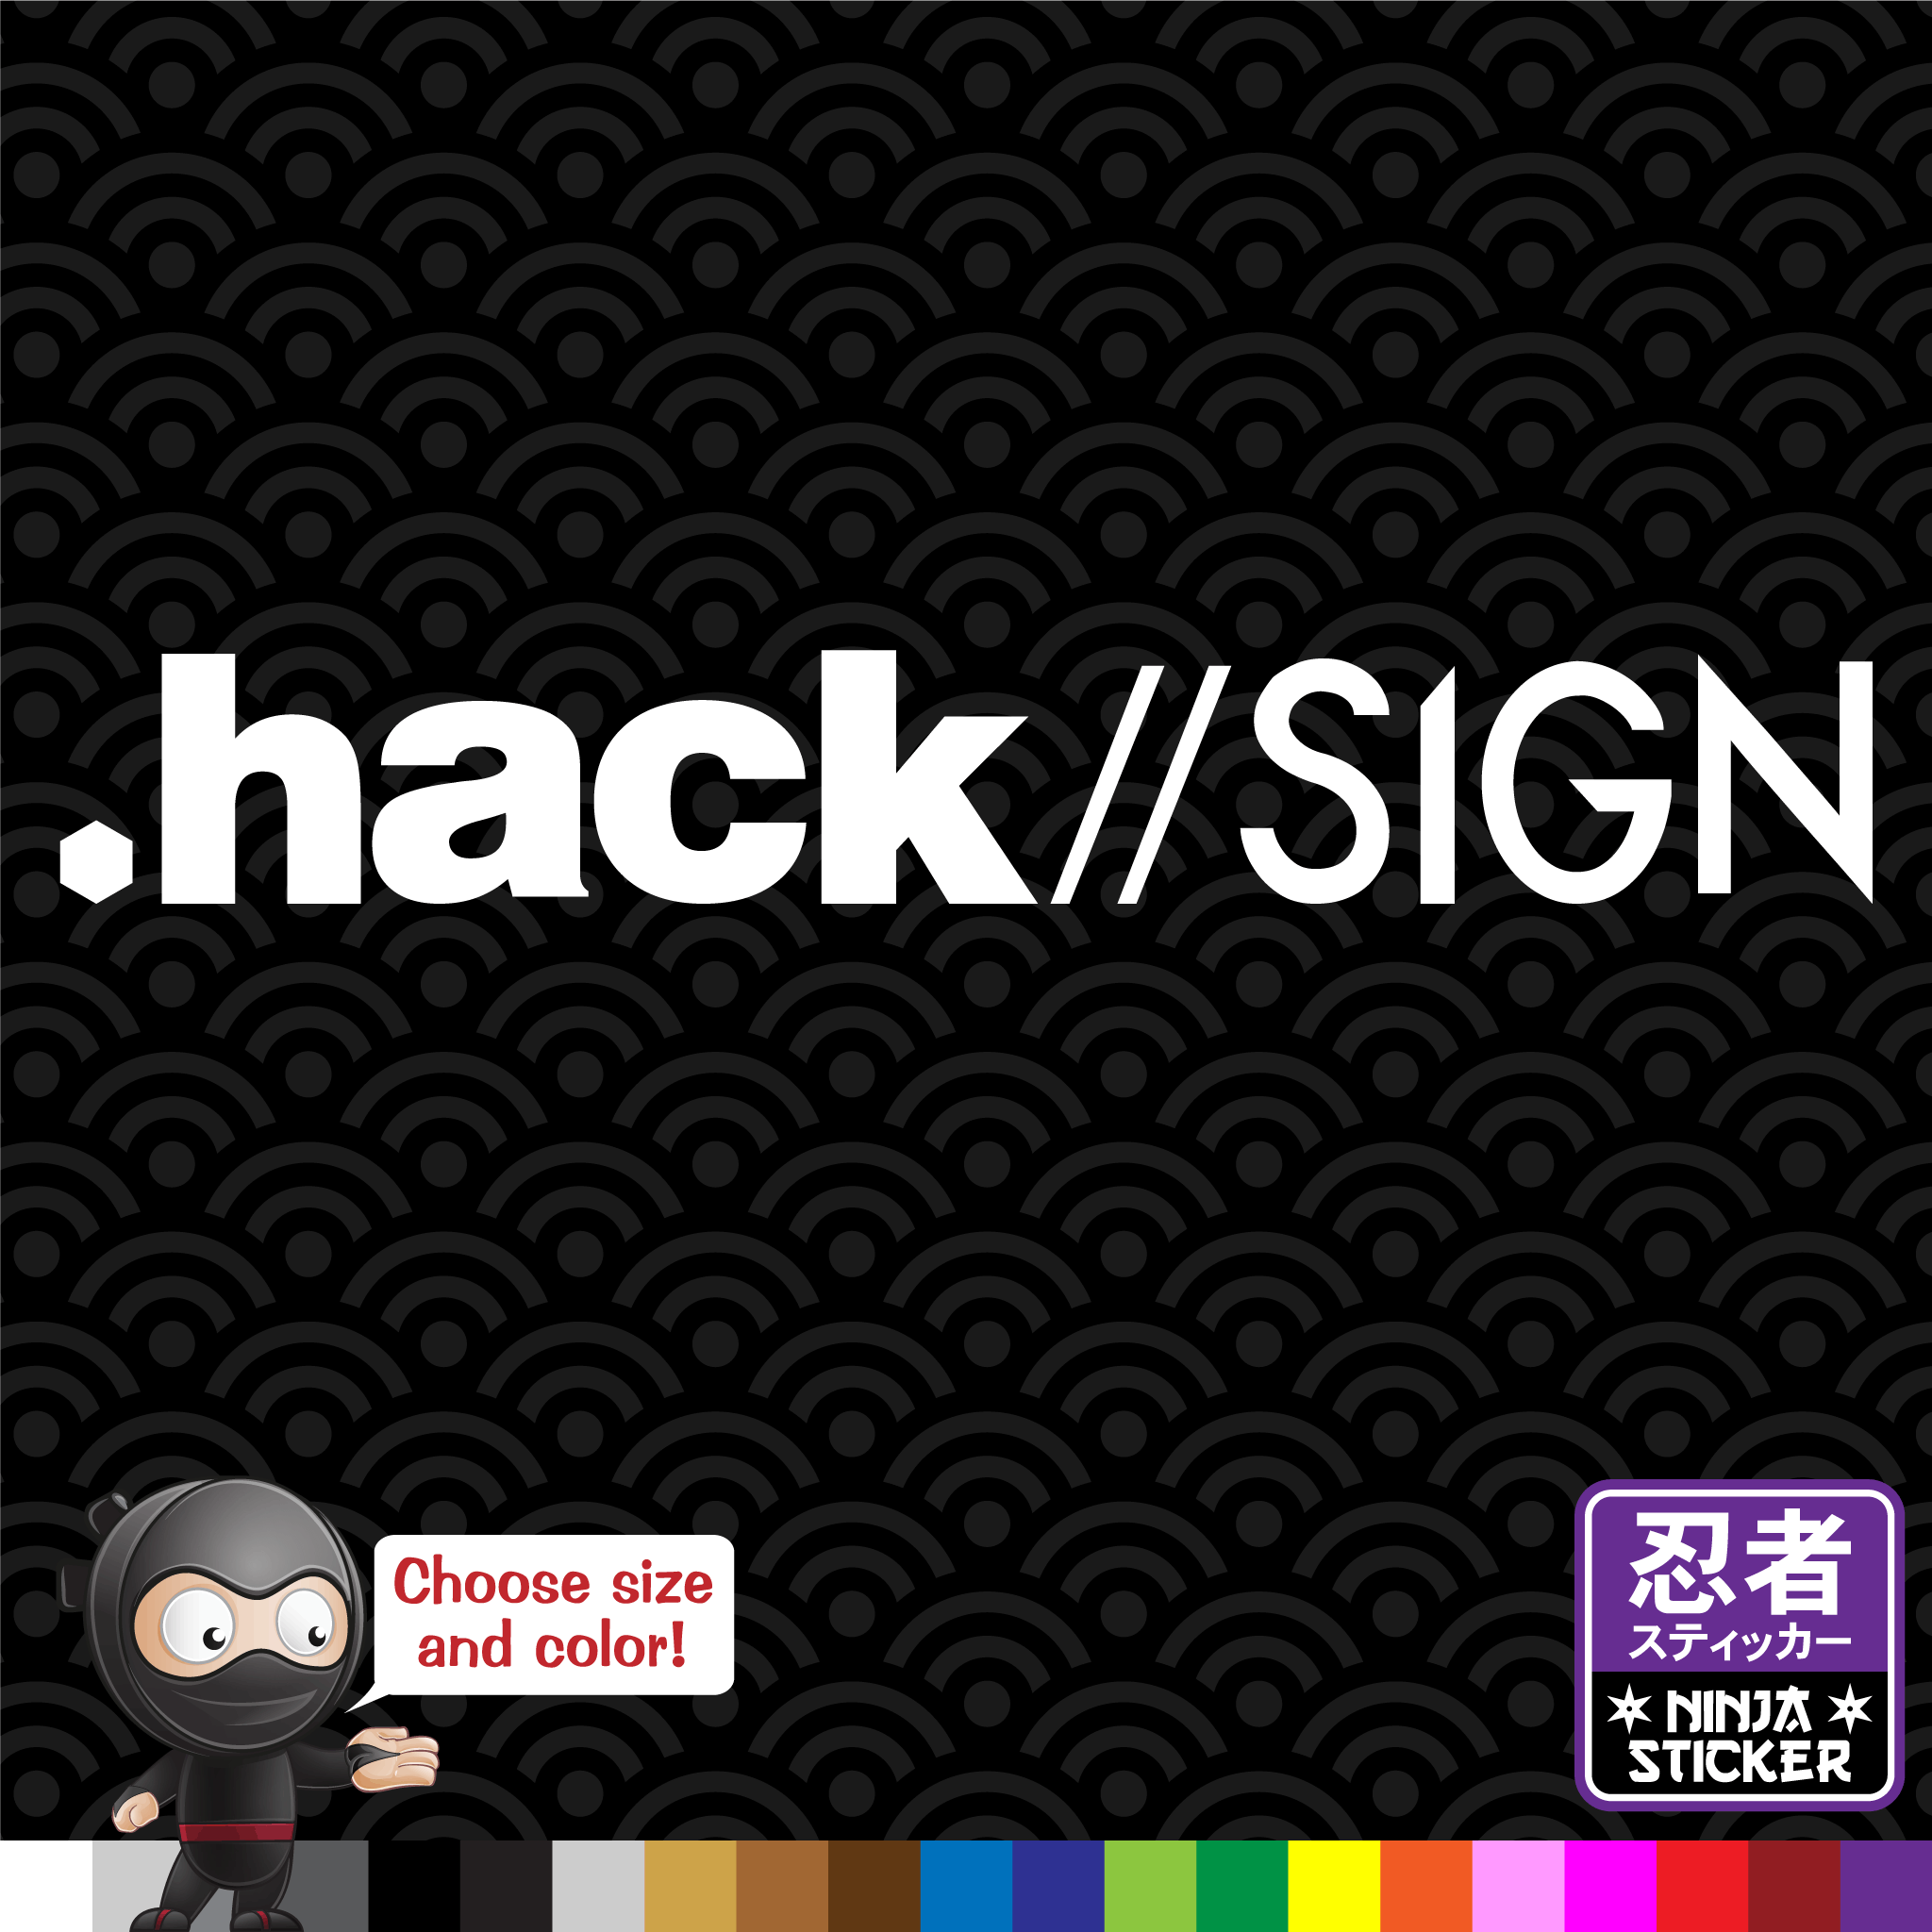 Thoughts on Dot Hack SIGN – That Dot Hacker